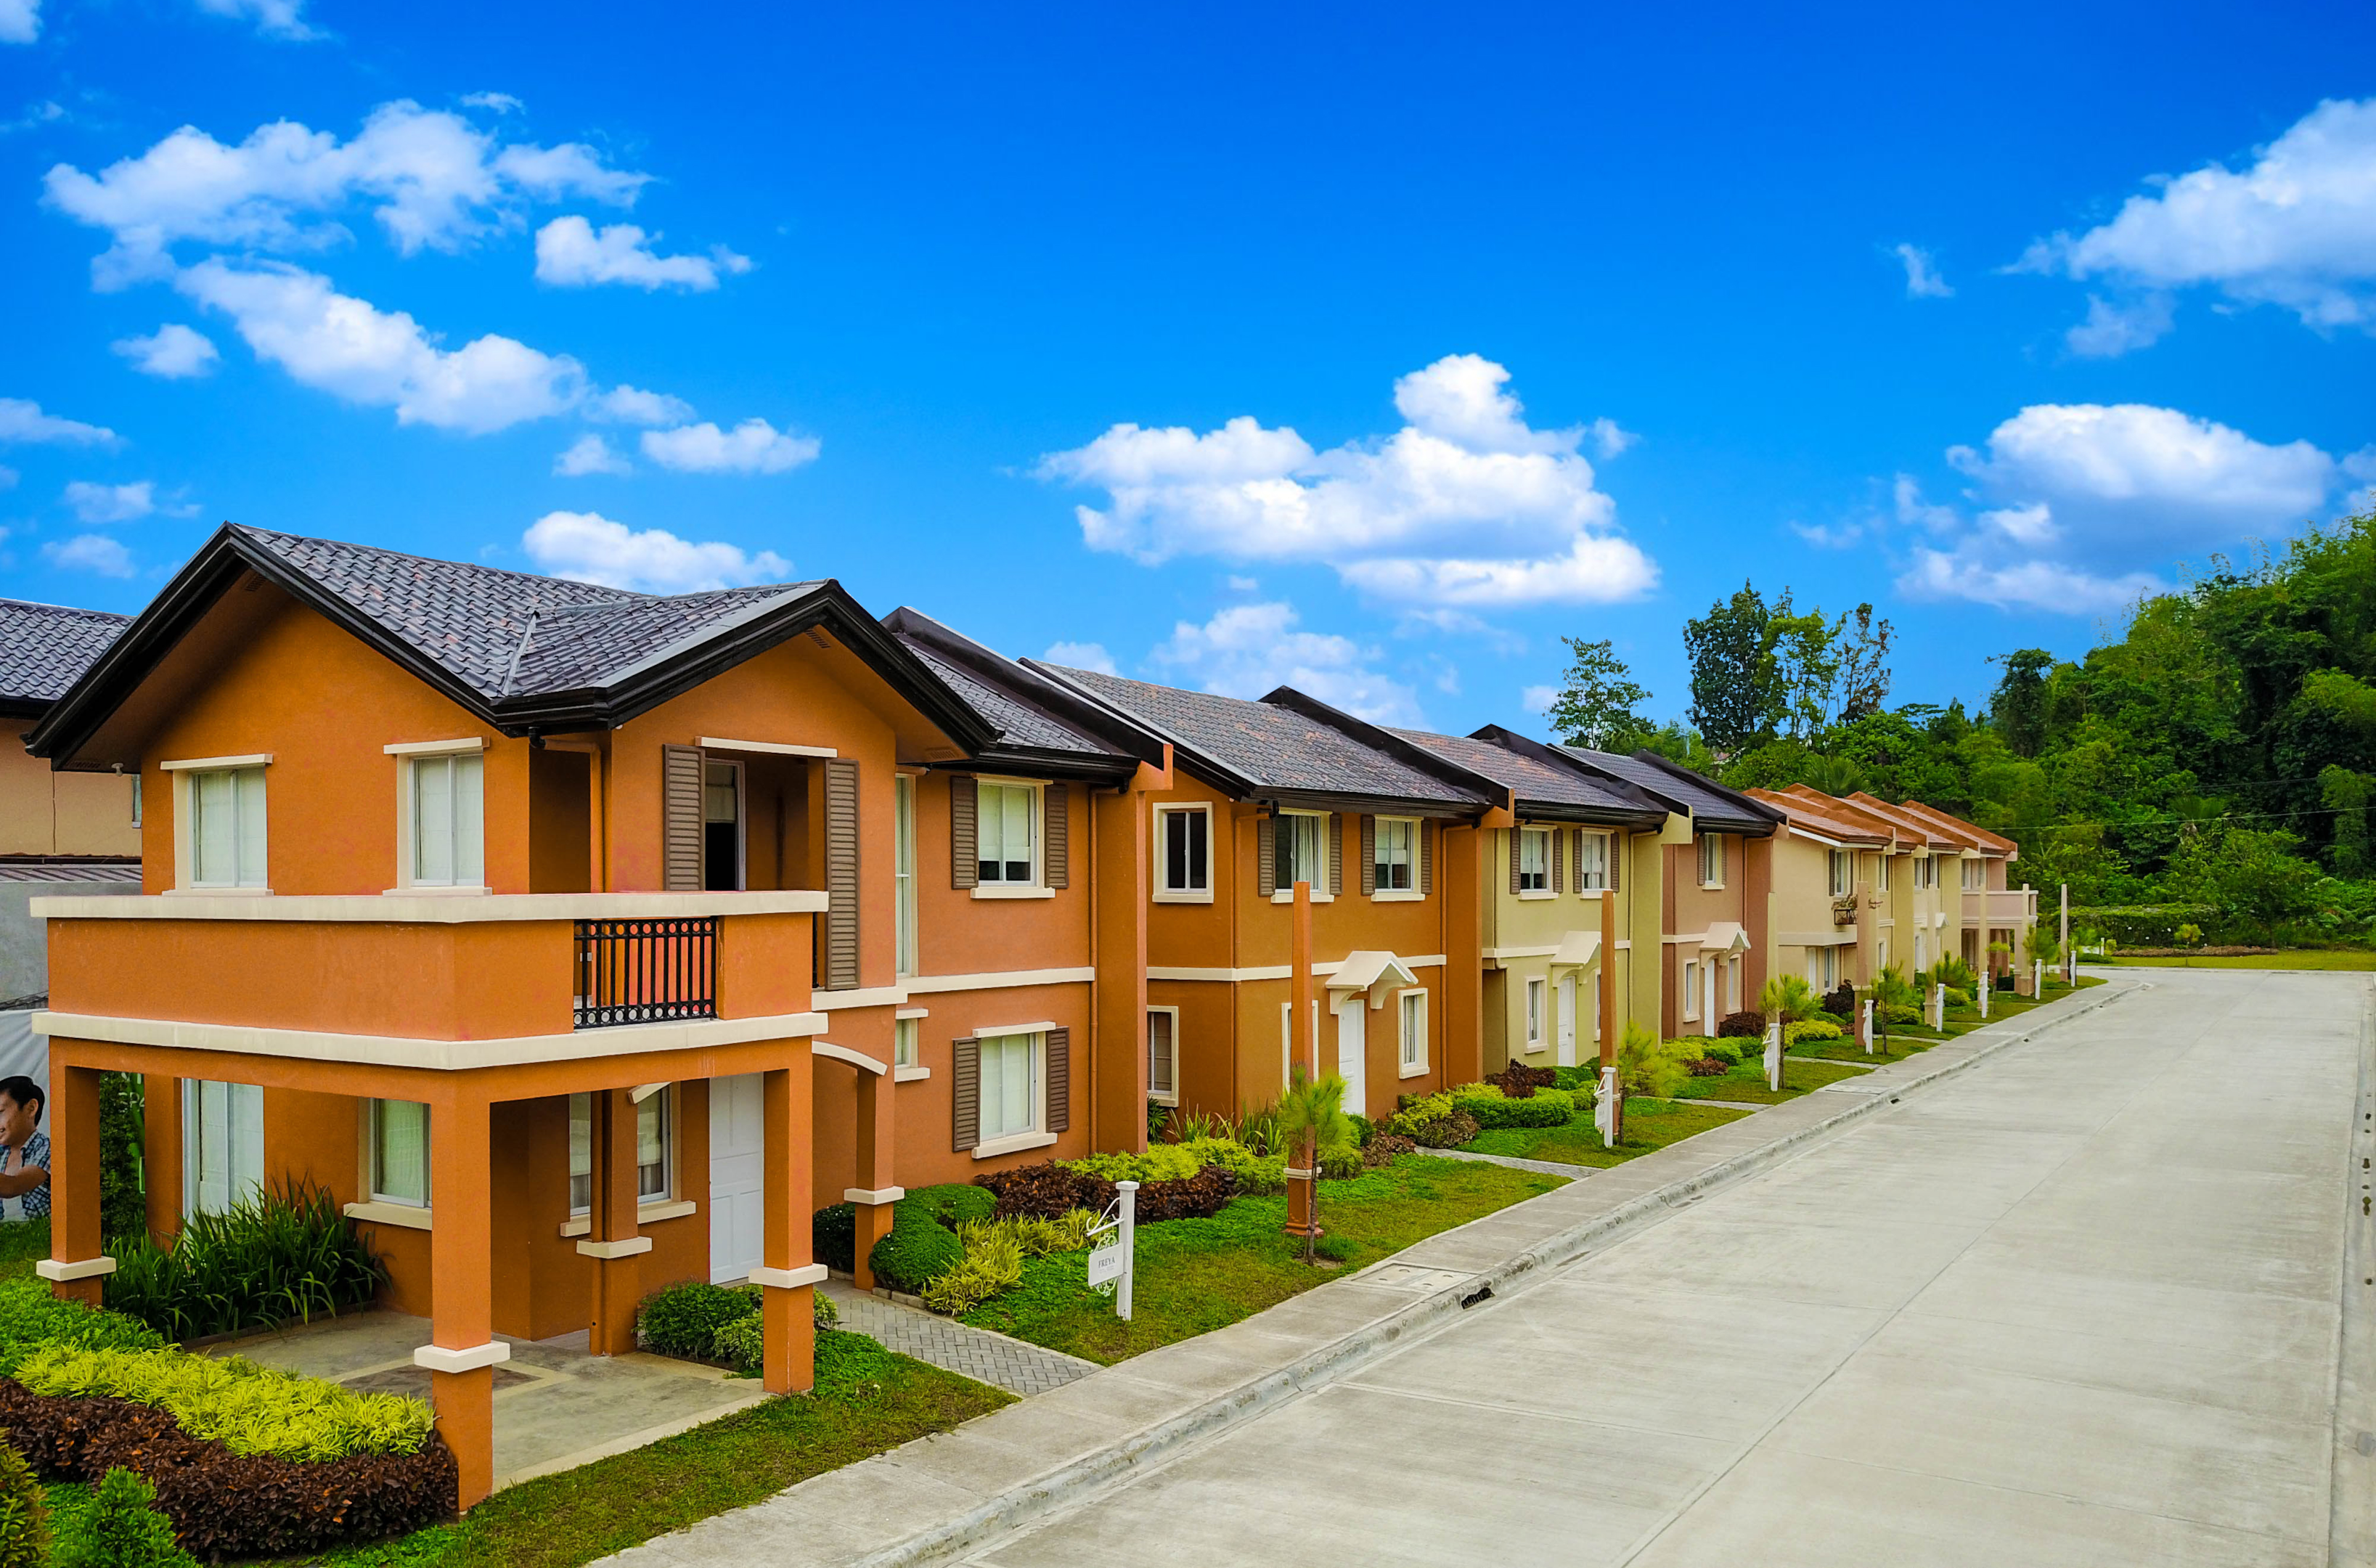 types of rental properties, rental property investment, ofw property investment philippines, ofw affordable house and lot, ofw investment